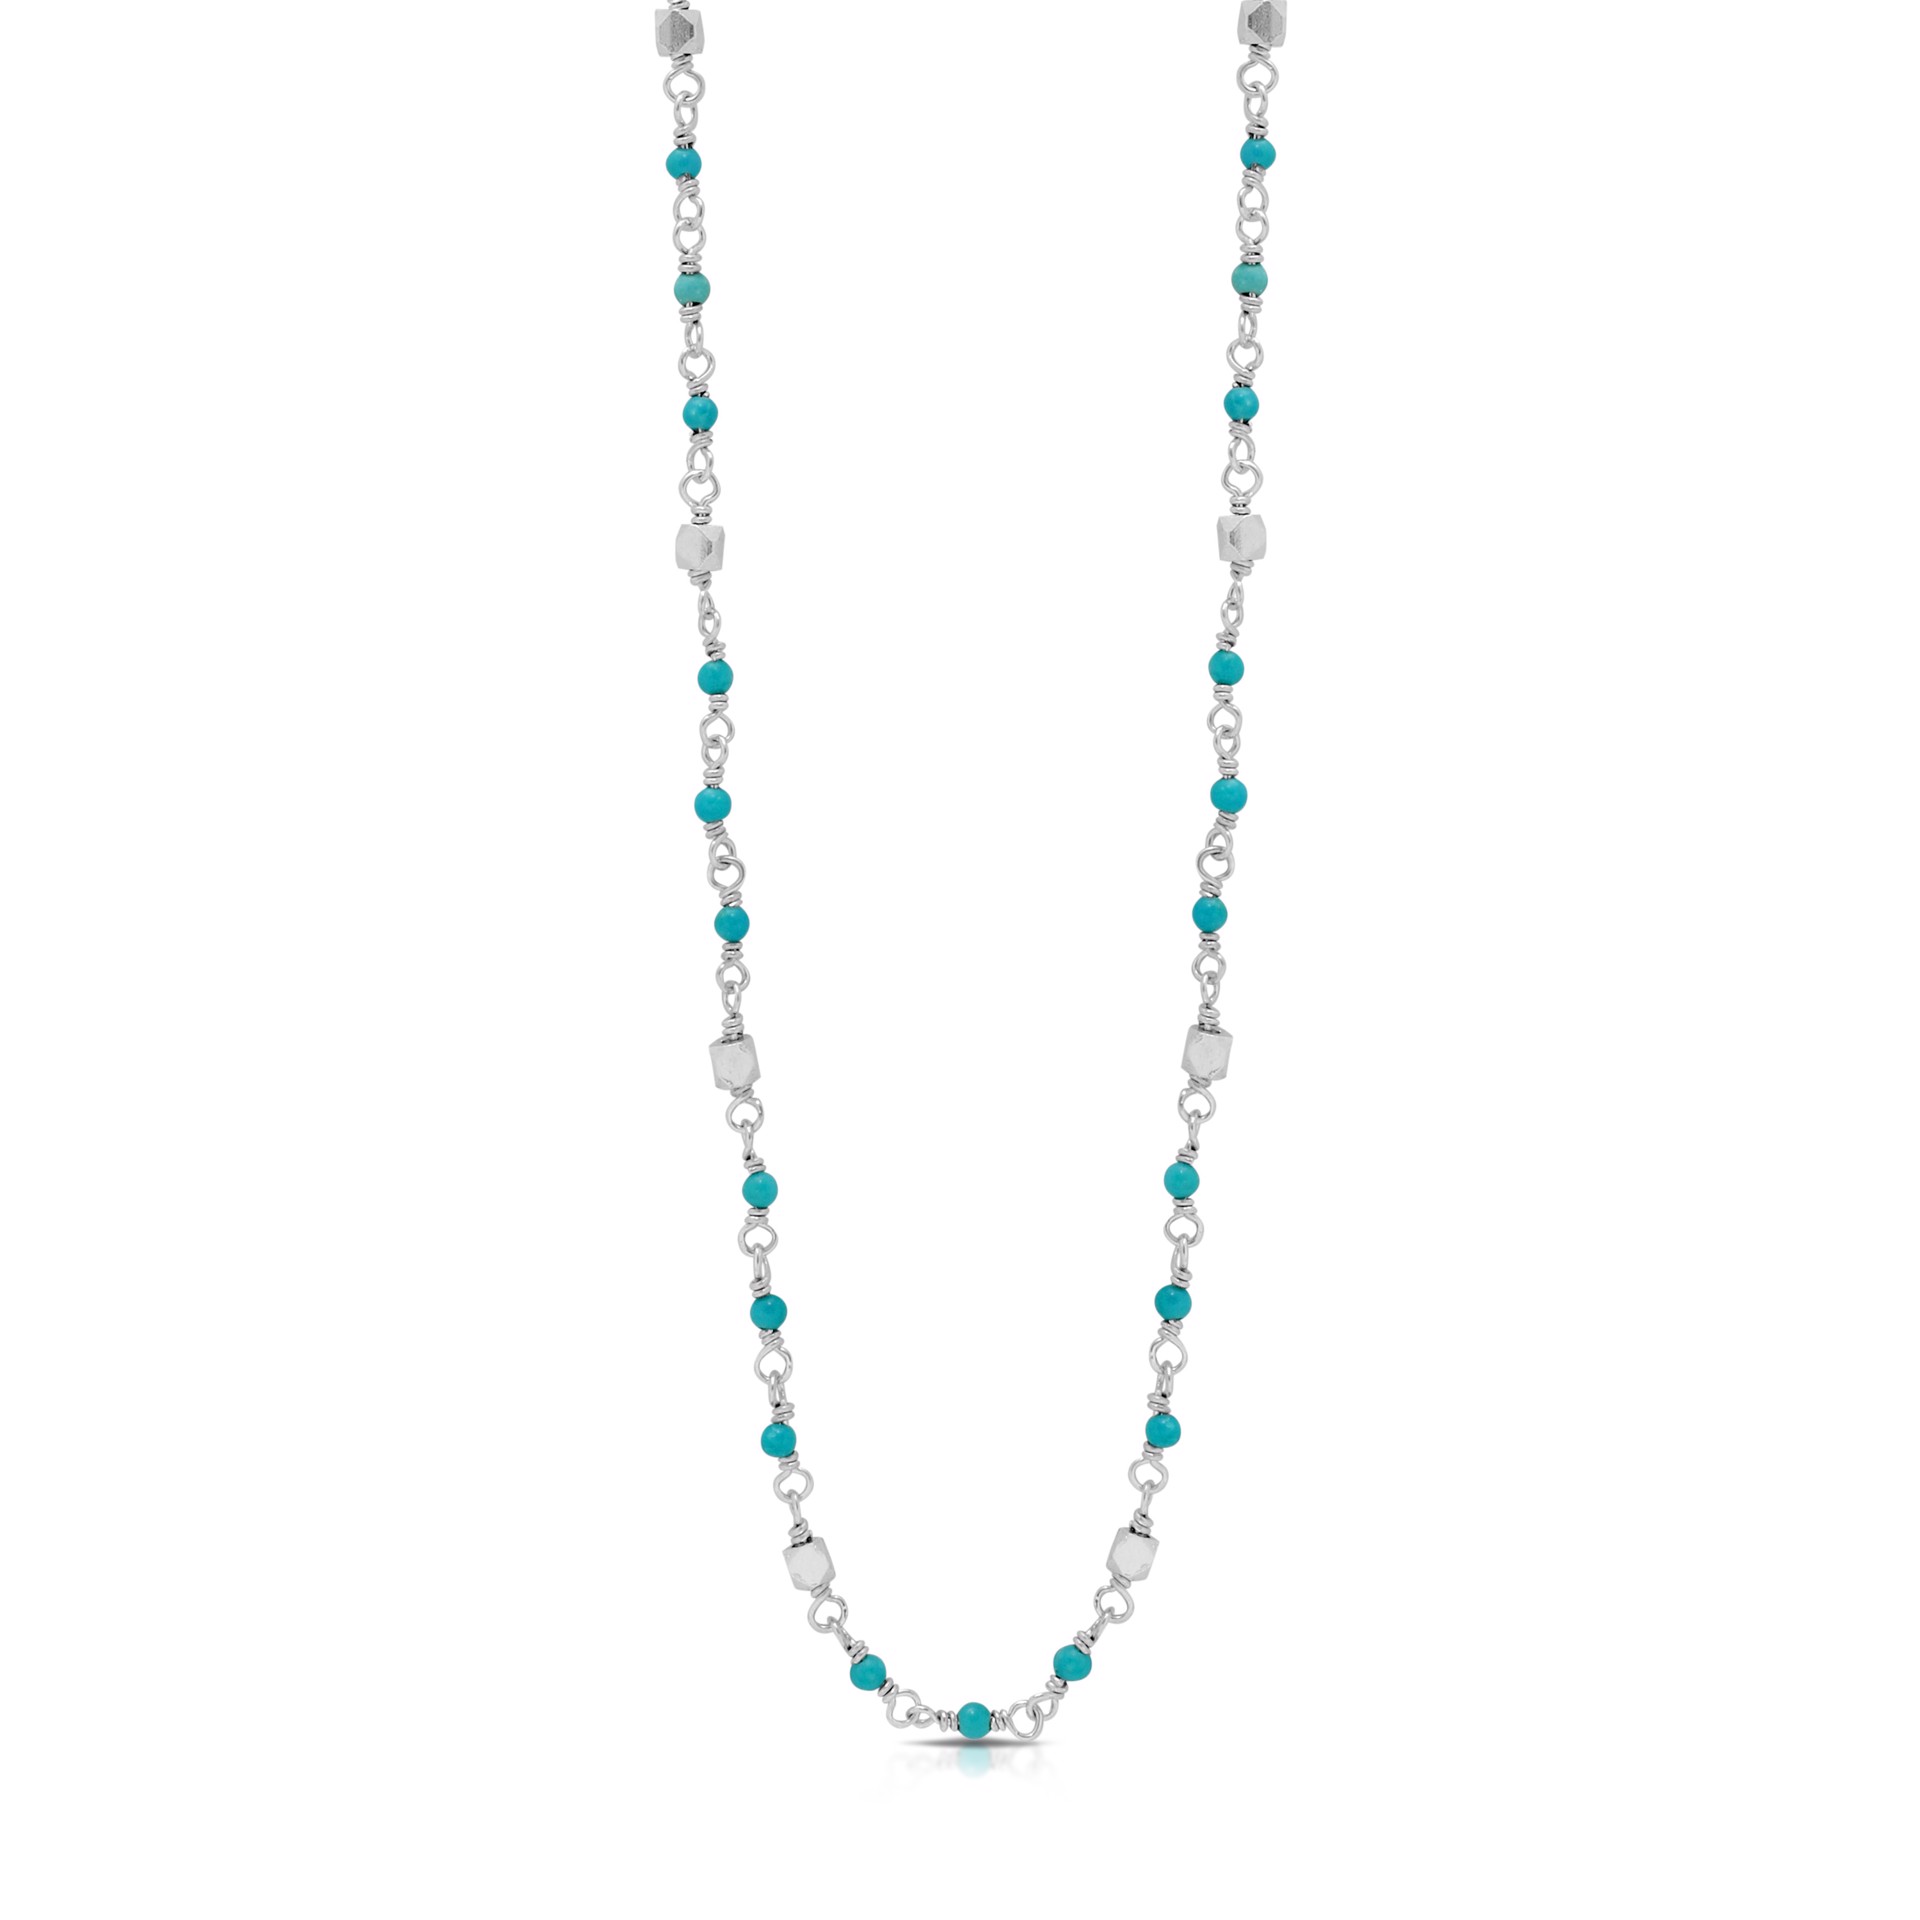 9656 Blue Turquoise Bead (2mm) Baby Wire Wrapped Single Strand with LH Scroll Bead Necklace 16" by Lois Hill